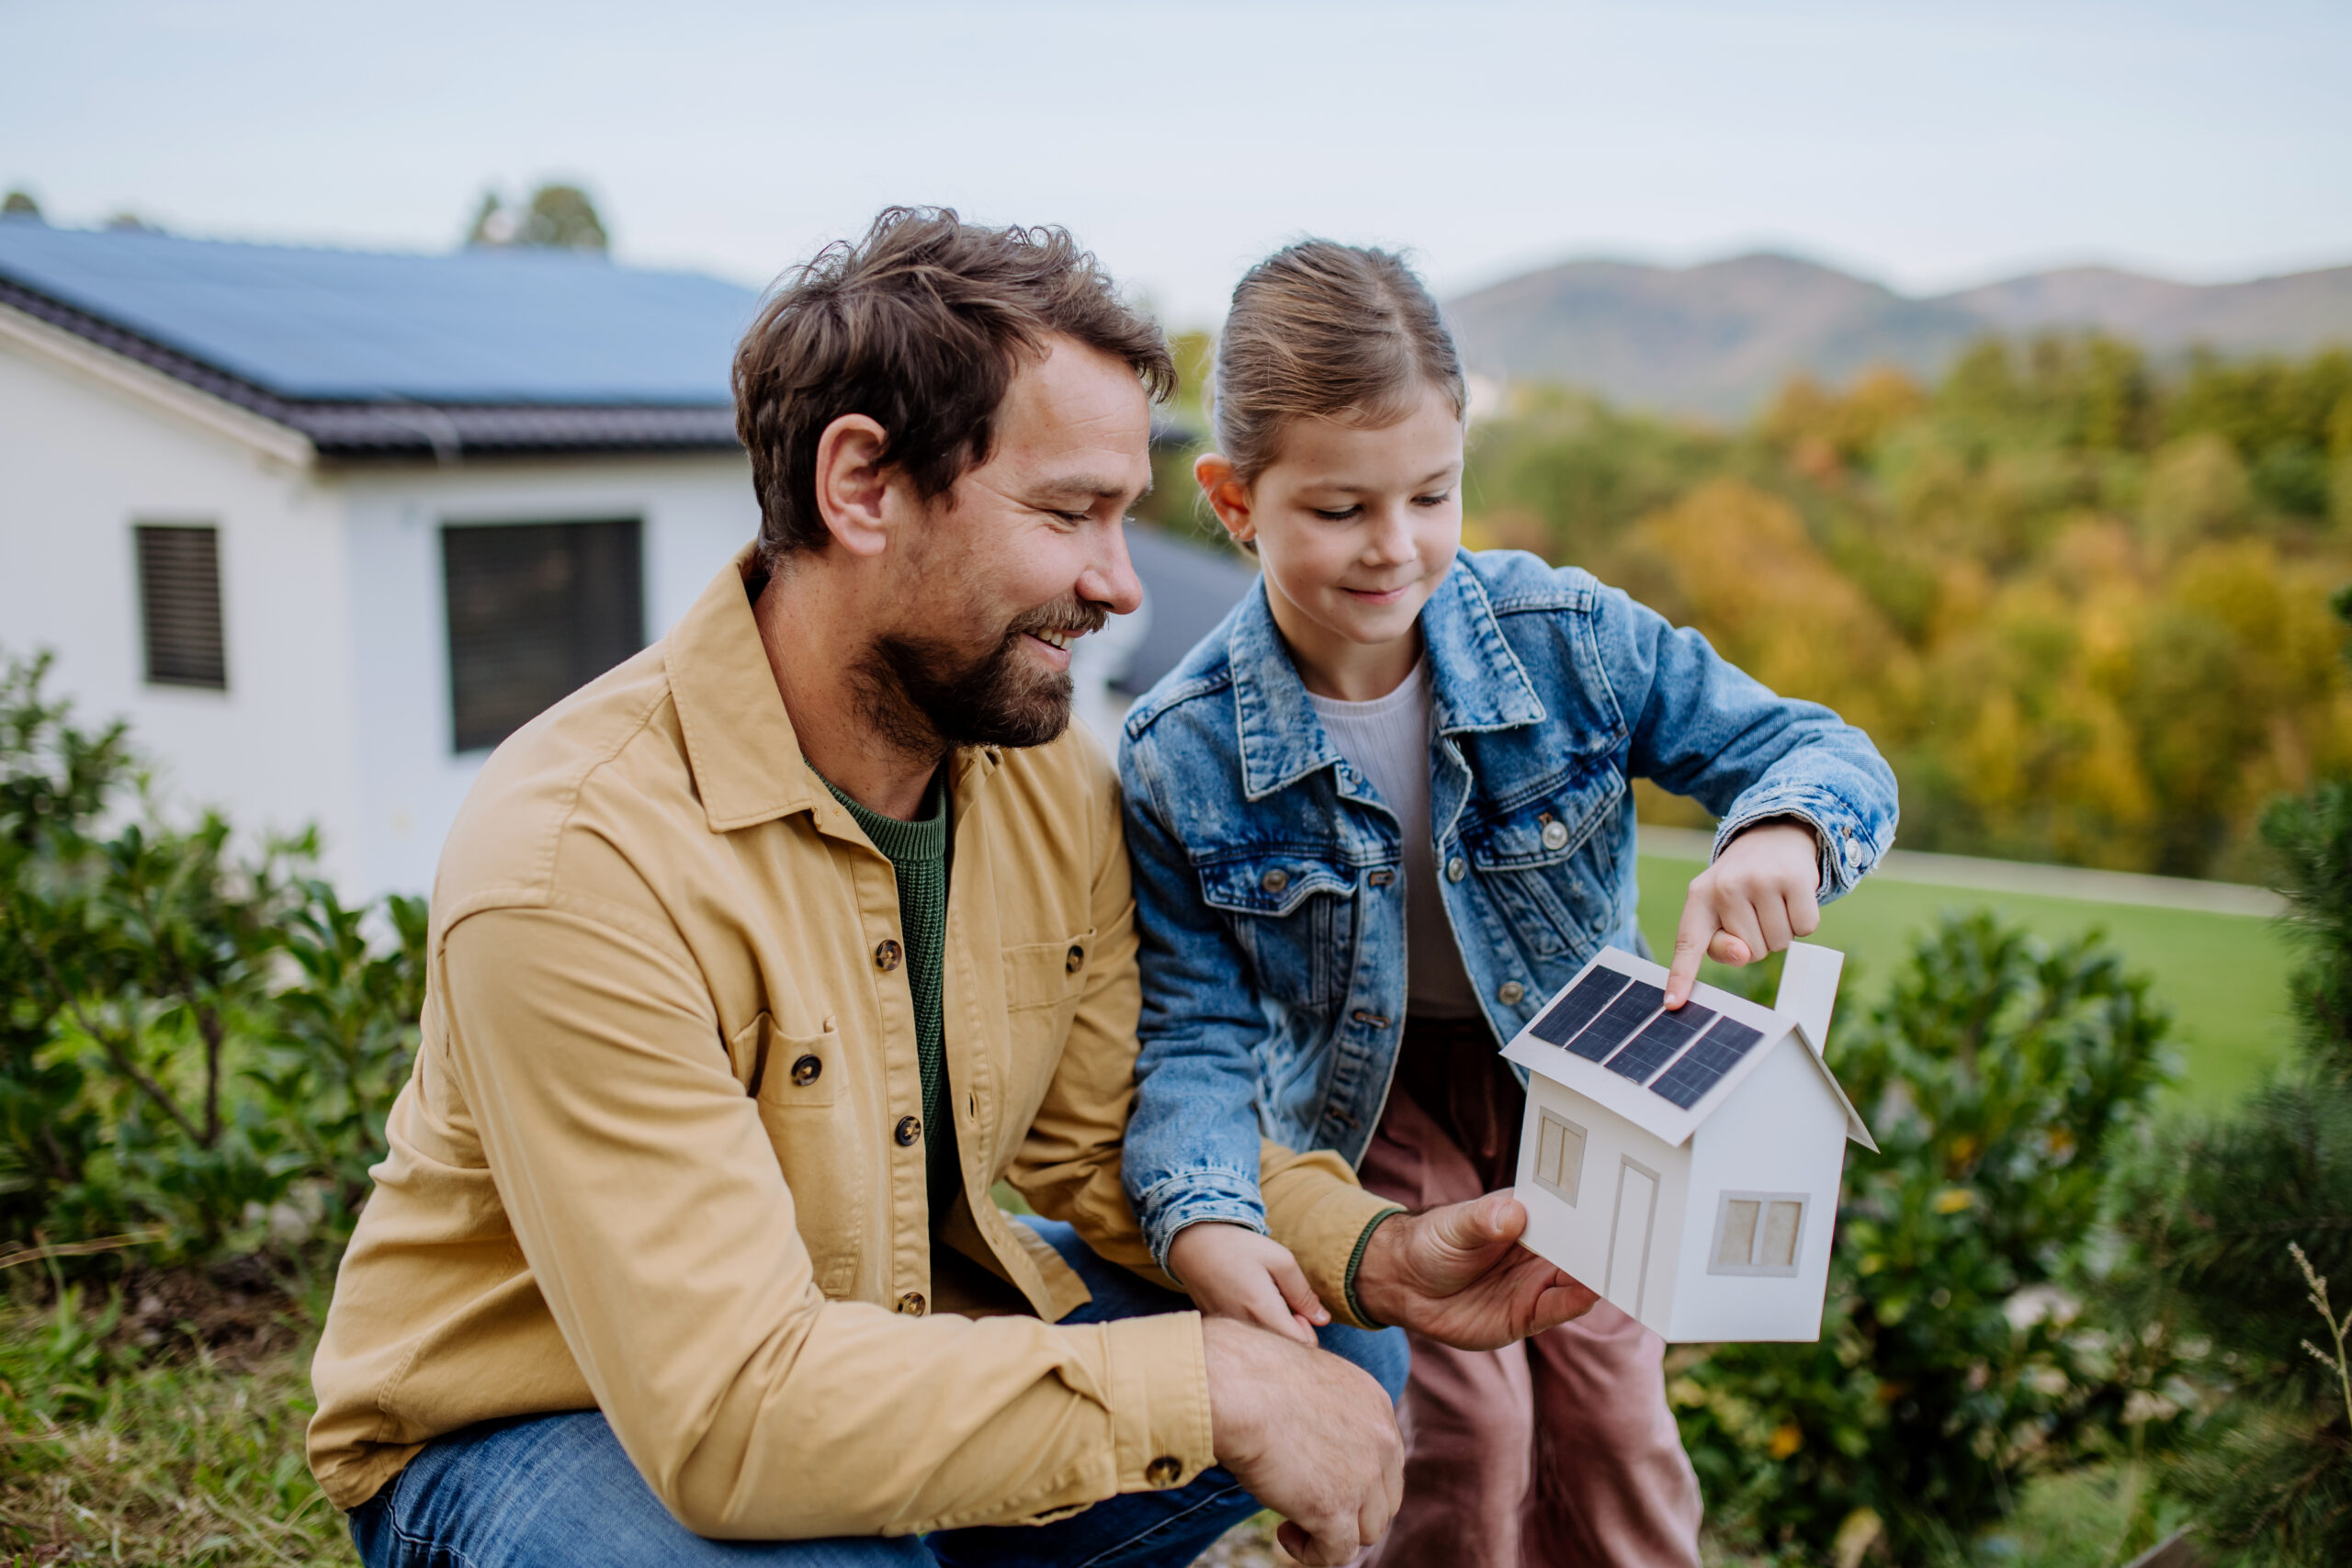 Little girl with her father holding paper model of house with the solar panels, explaining how it works.Alternative energy, saving resources and sustainable lifestyle concept.